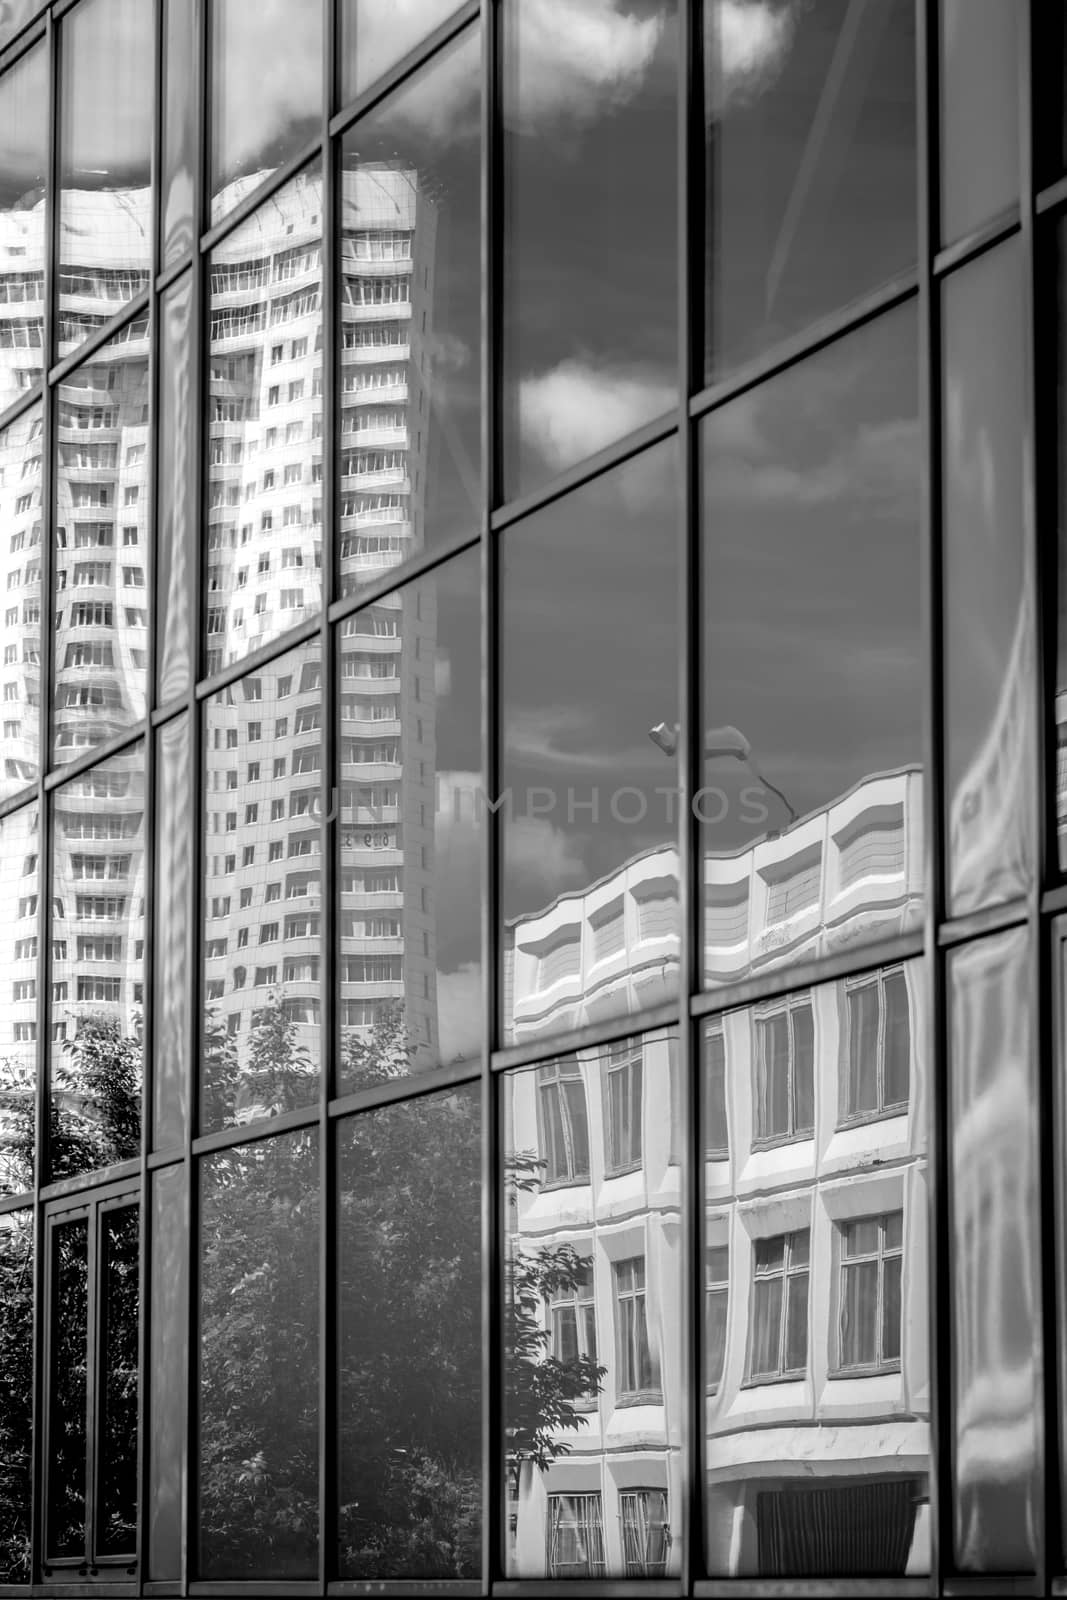 Reflection in the windows of another building black and white vertical by Deniskarpenkov